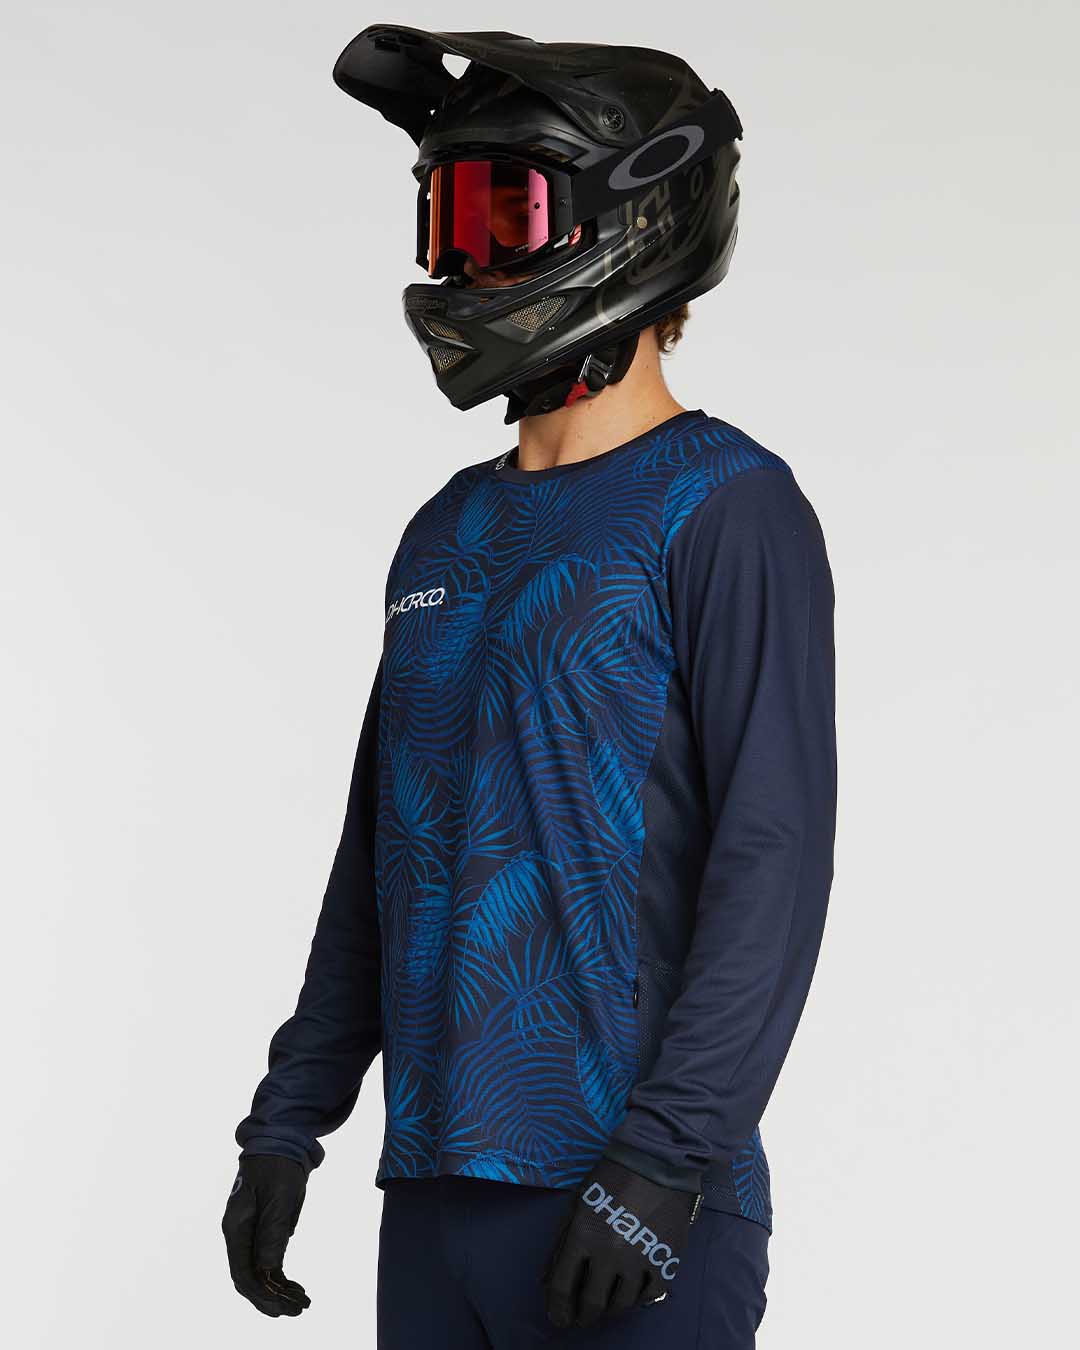 Mens Gravity Jersey  Forbidden - DHaRCO Clothing